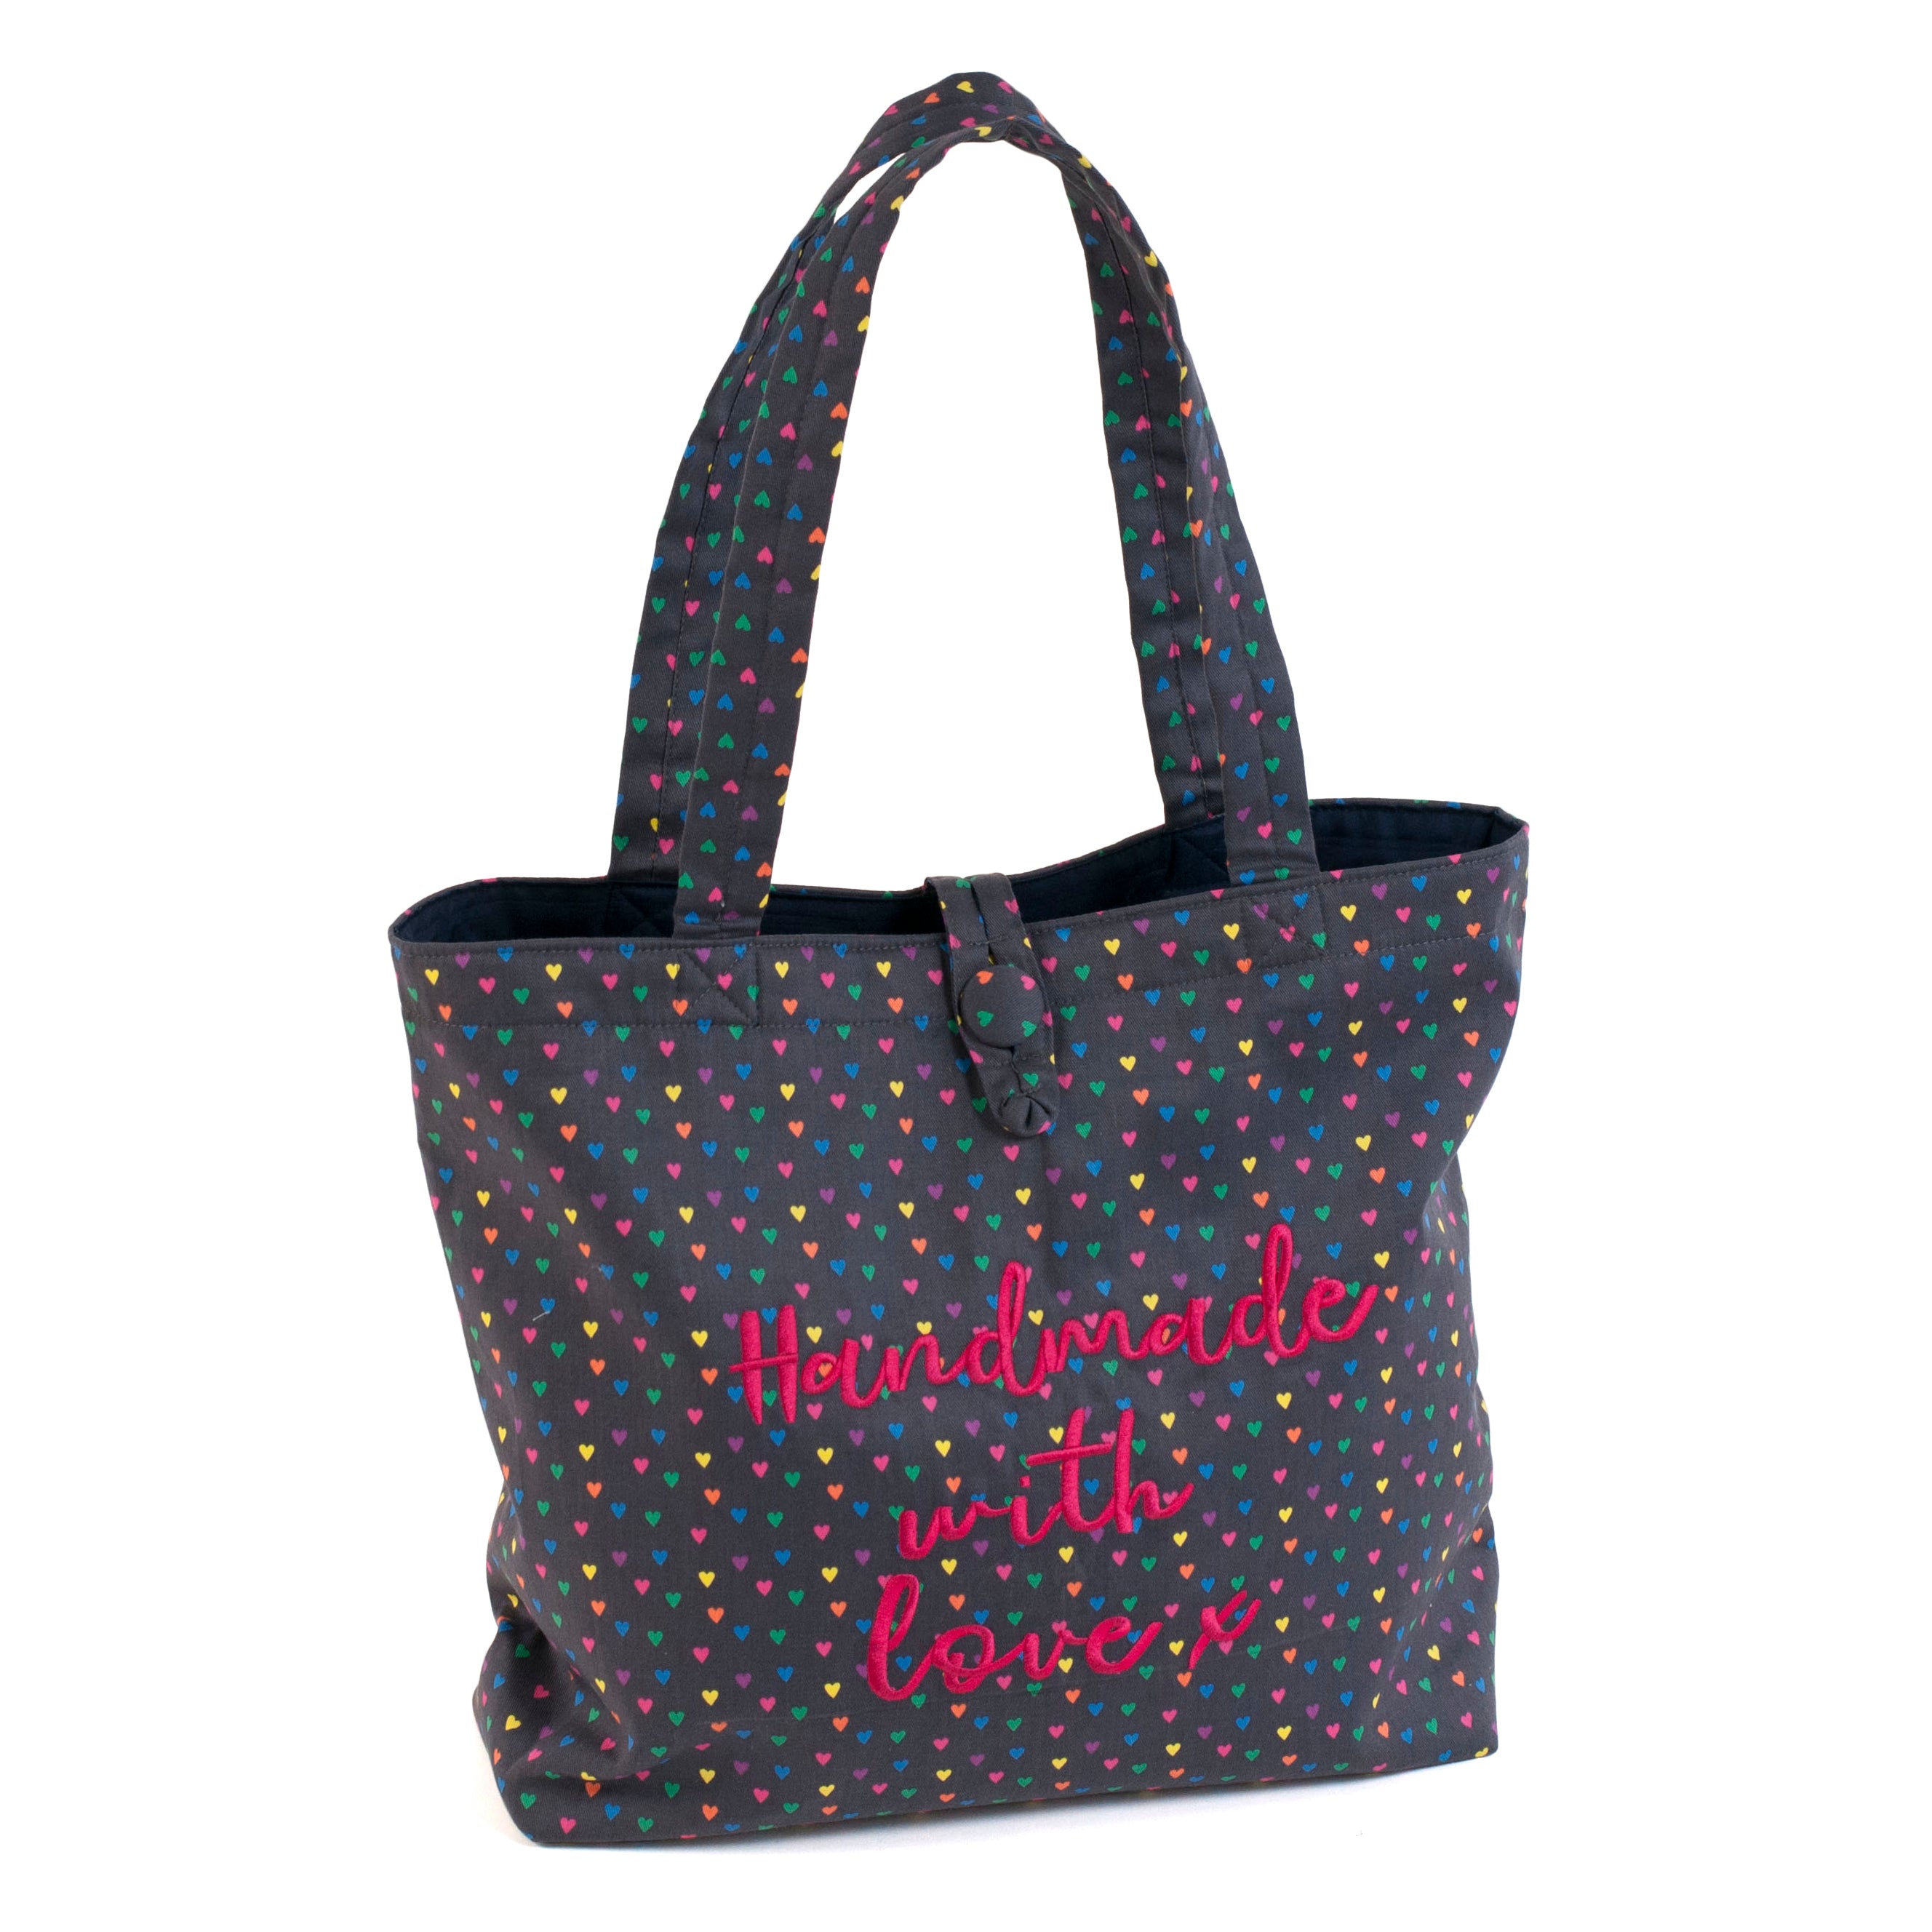 Hobby Gift Craft Tote - Embroidered Hearts